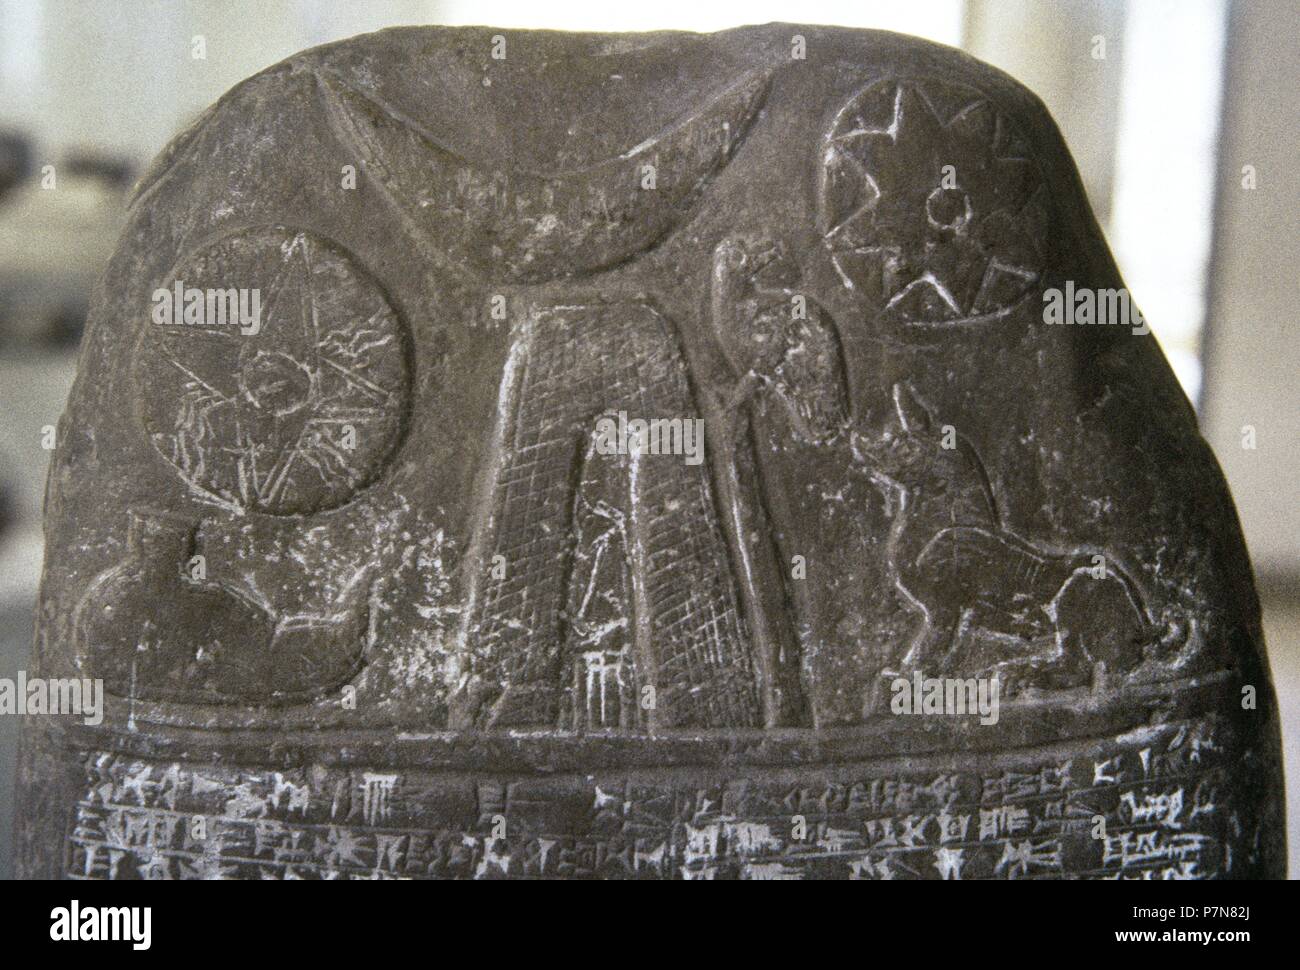 Mesopotamia. Stela of Babylonian origin with the representation of the sun, the moon and water with cuneiform writing in the lower part. 3.000 BC. Detail. Archaeological Museum of Iran. Theran. Stock Photo